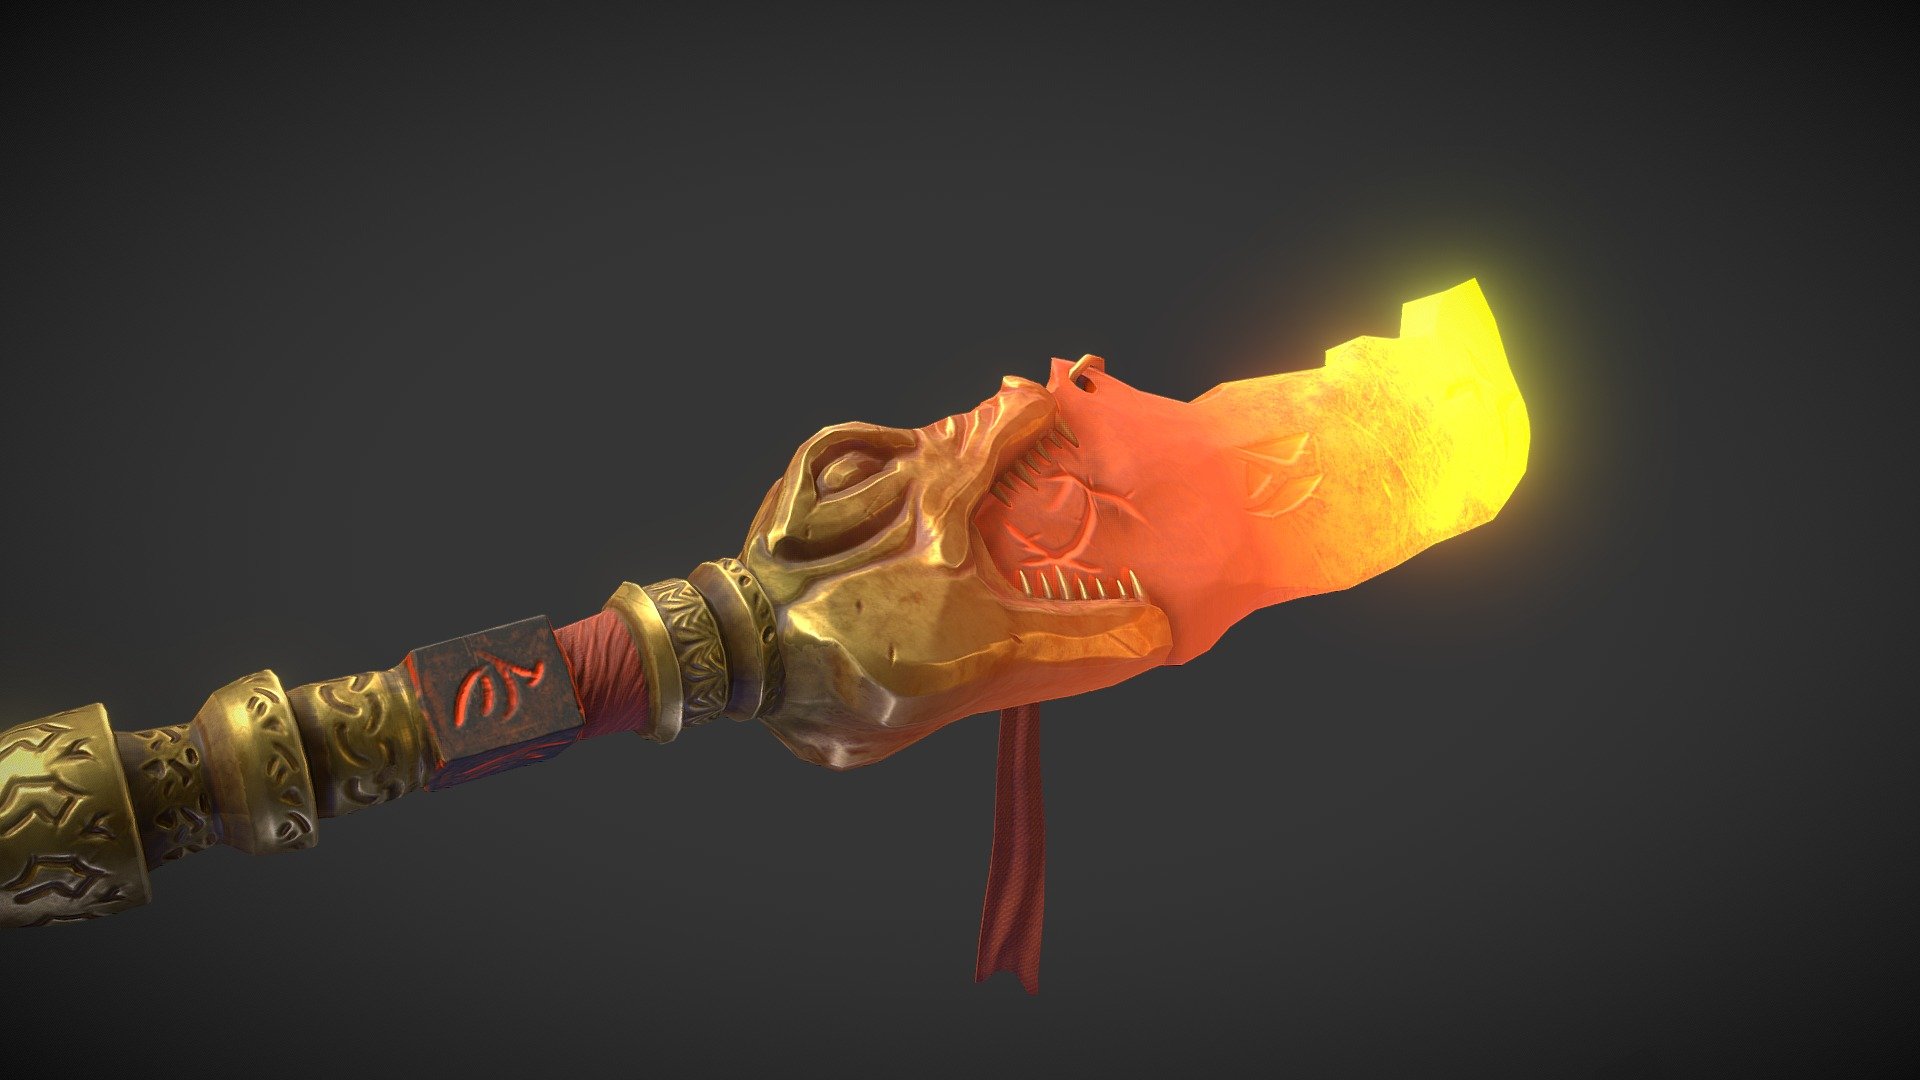 Here is a rework from a previous account I made 2 years ago. Did a little update on the overall presentation, baking and texturing. 

The Dragon's Breath is a school project I made 2 years ago. I was Inspired by an old medieval chinese weapon name Guandao 3d model